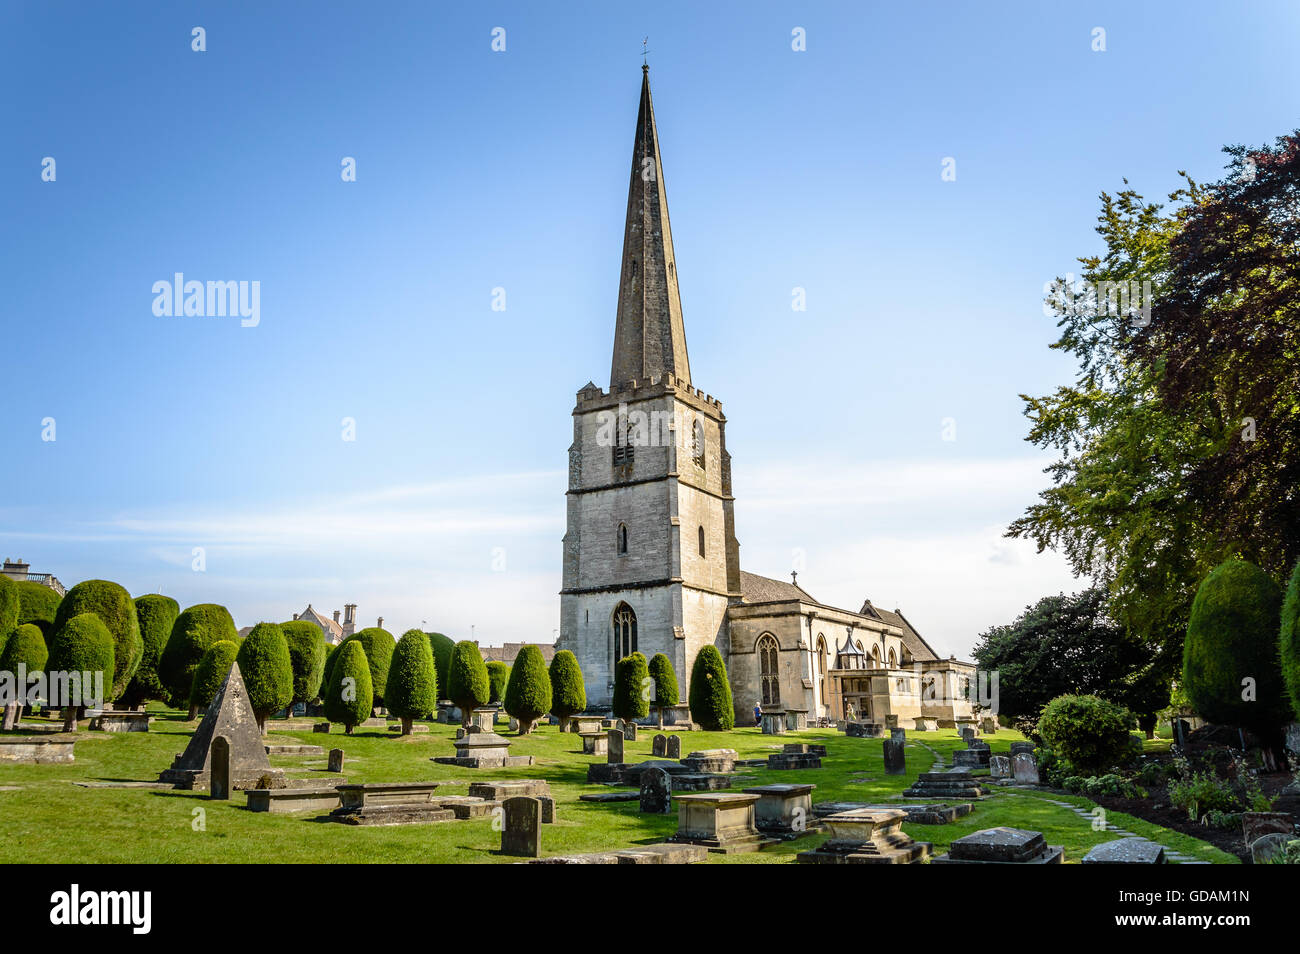 Painswick, UK - August 17, 2015: St Mary's Church and churchyard a blue sky day. Painswick is a town in the Cotswolds, originall Stock Photo